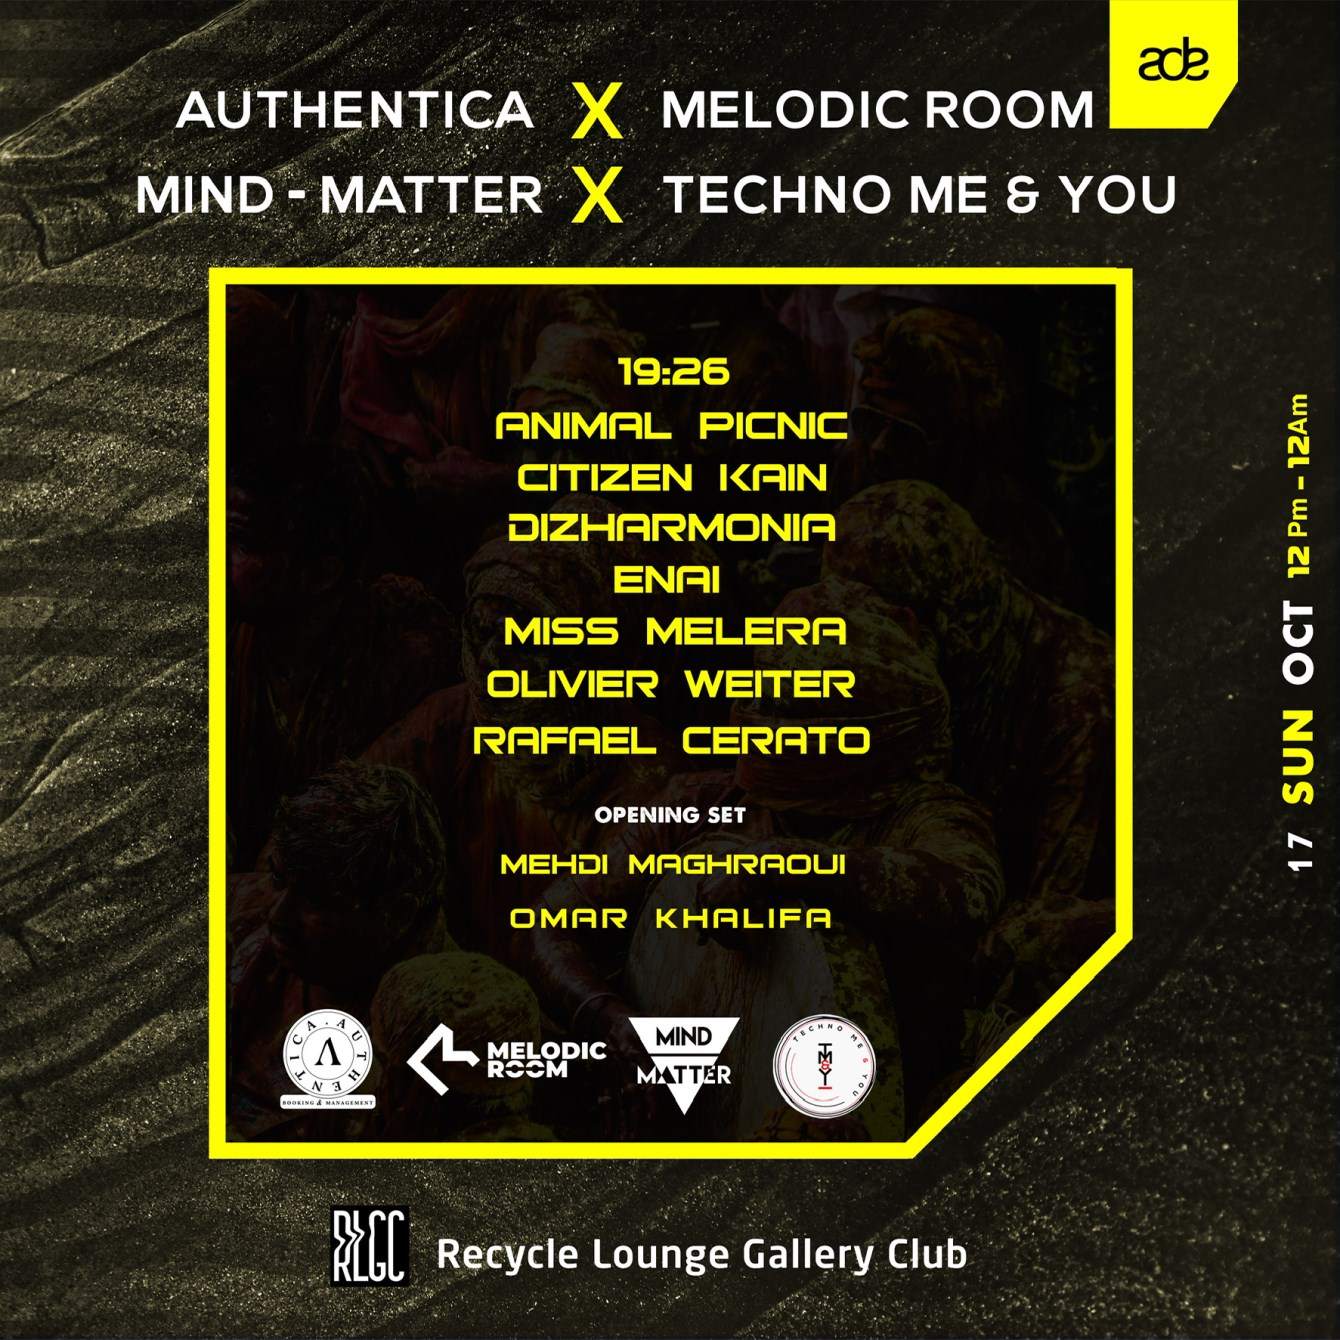 ADE Curated by Authentica, Melodic Room, Mind-Matter, and Tm&y - Página frontal